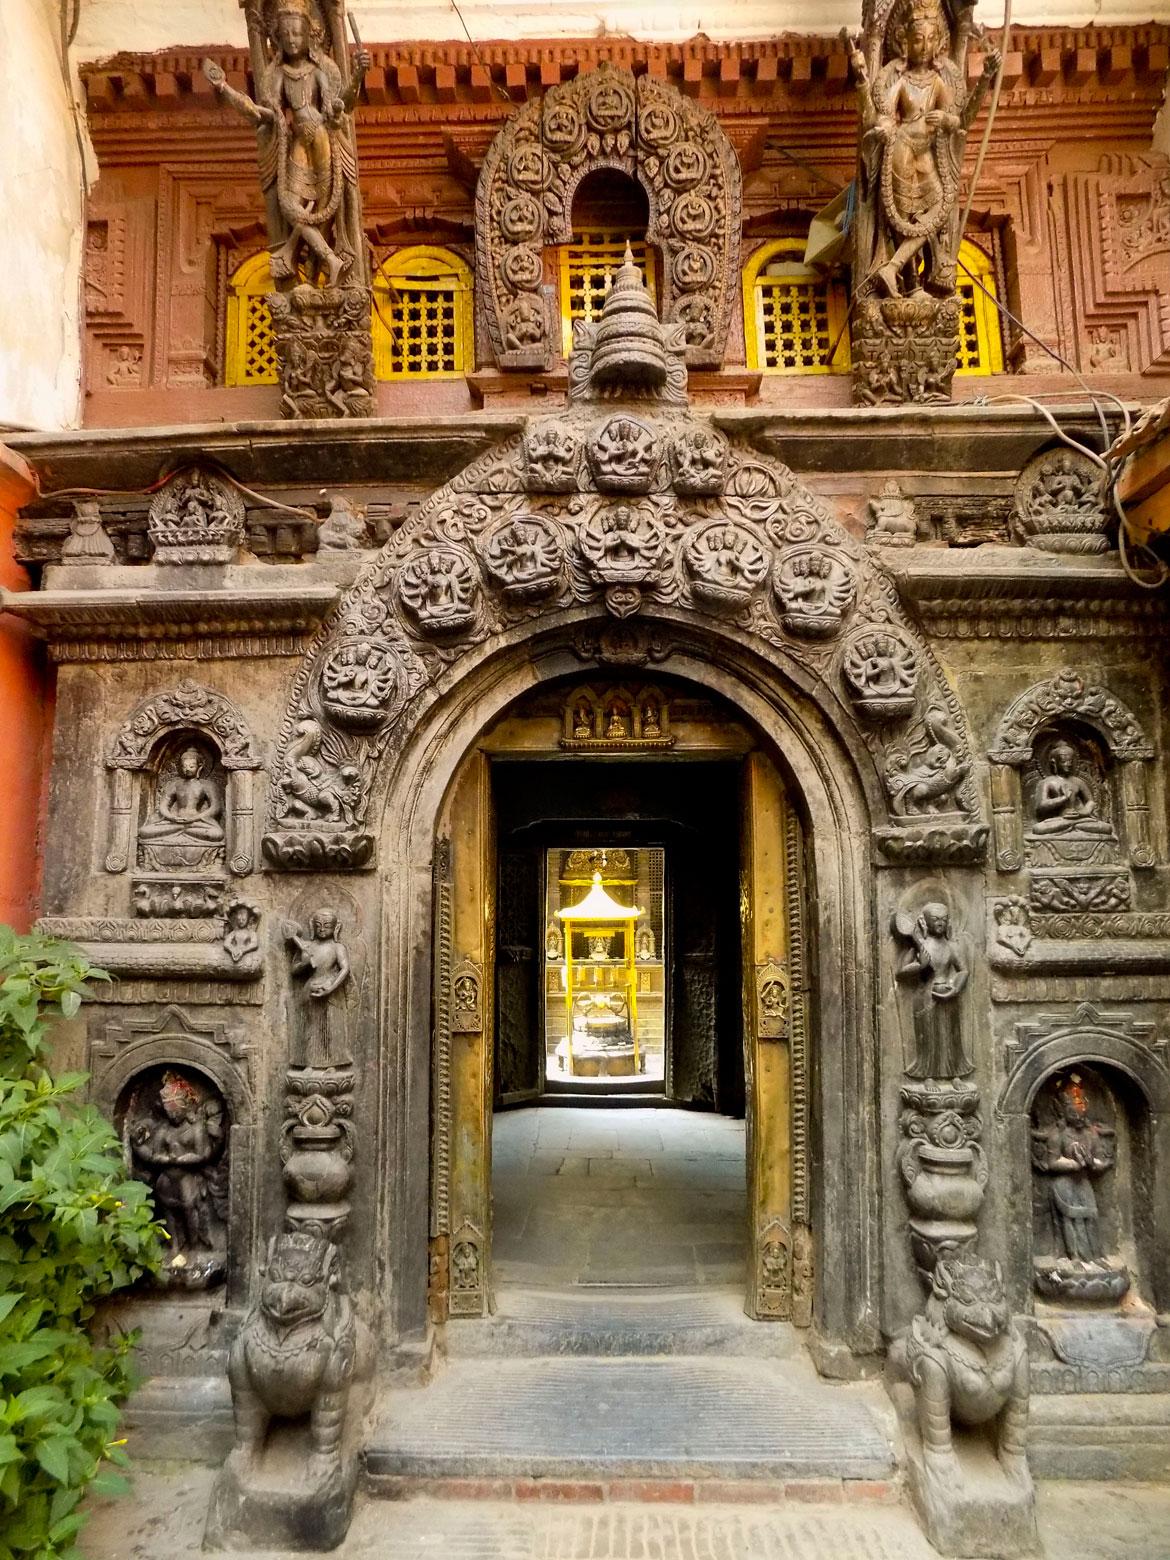 The bigger courtyards are, of course, the ones that are home to the big monasteries or bahas. These are entirely religious spaces, with multiple shrines and temples enclosed within. This is the ornate entrance to the biggest monastery in Patan, the Kwa Baha. Its Sanskrit name is Hiranyavarna Mahavihar, and its popularly known to tourists as the Golden Temple